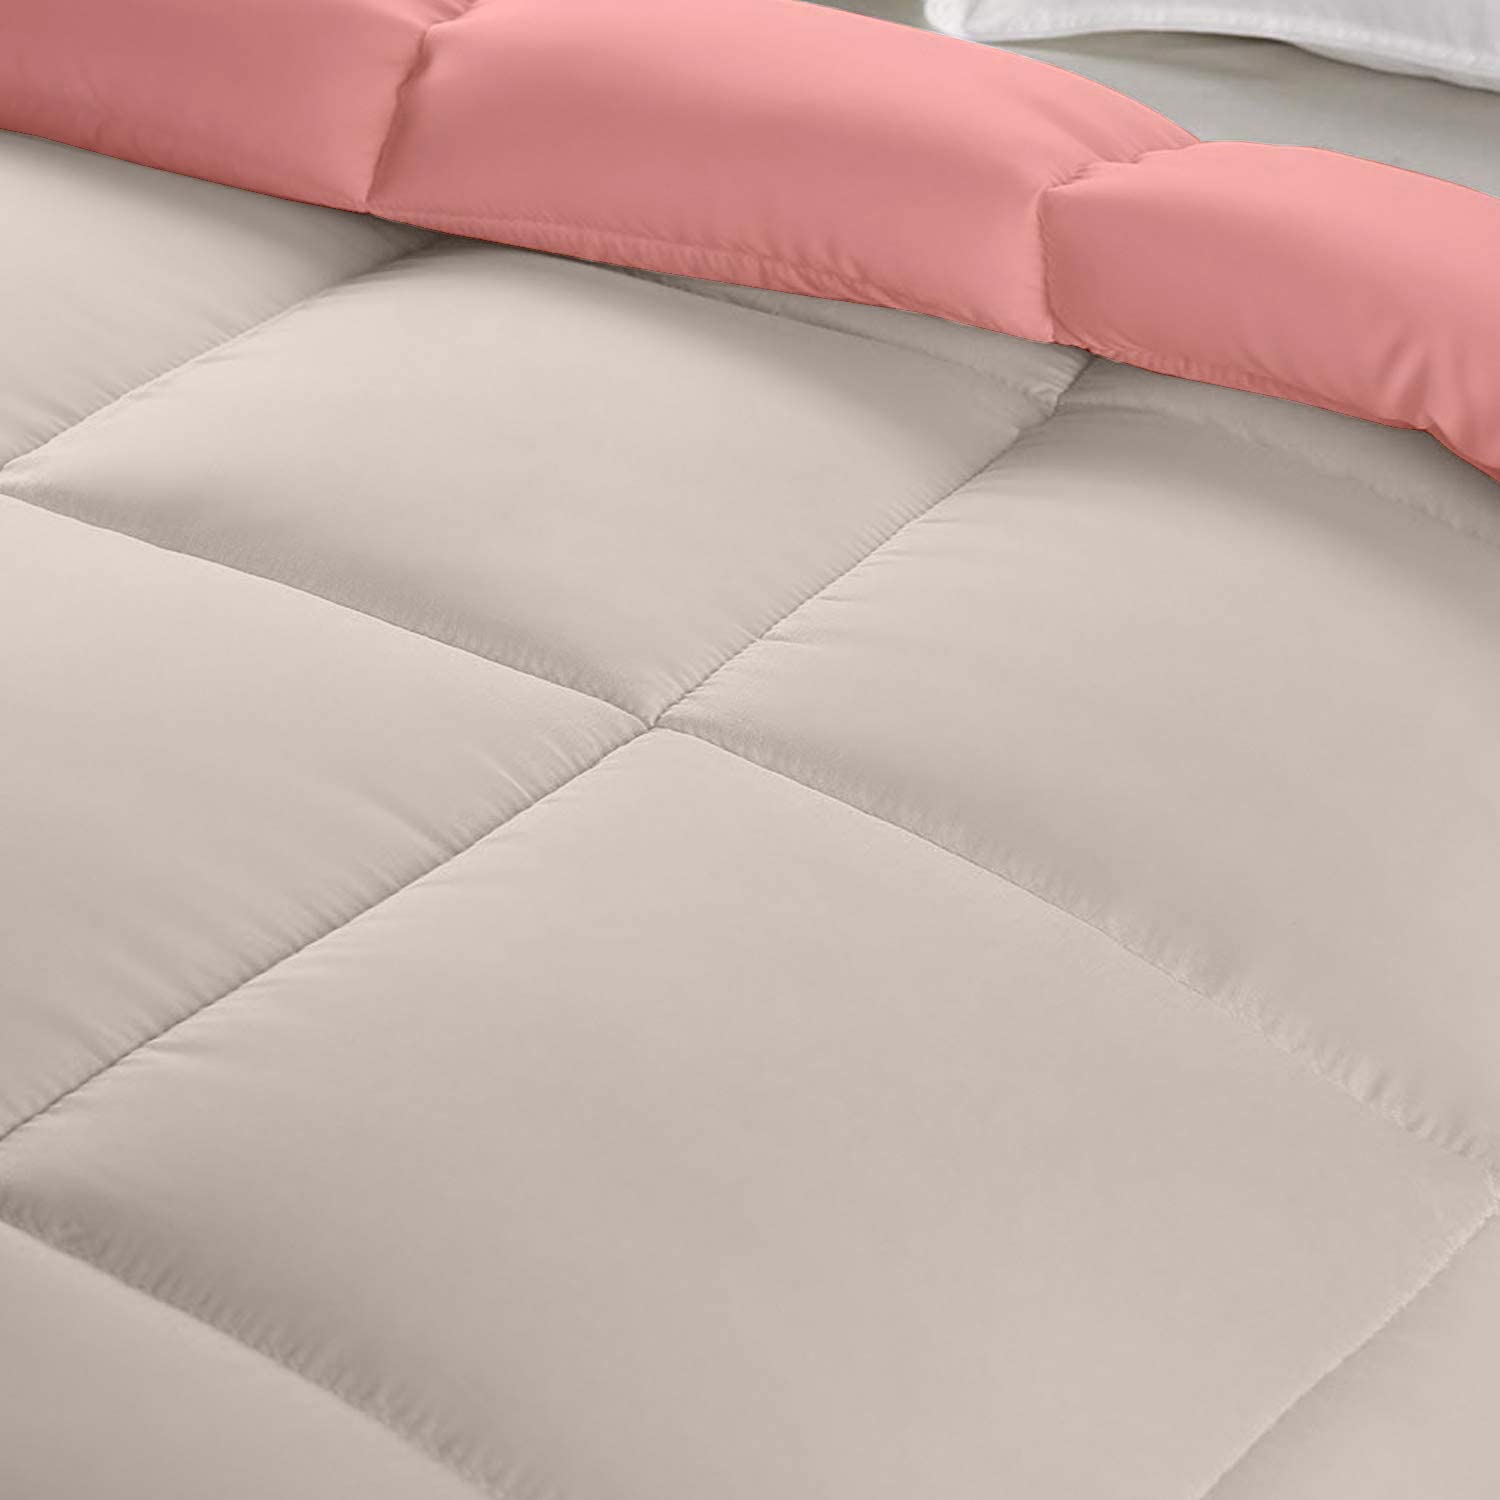 Reversible Comforter Single / Double Bed 110 GSM, Sandy Beige + Candy Pink